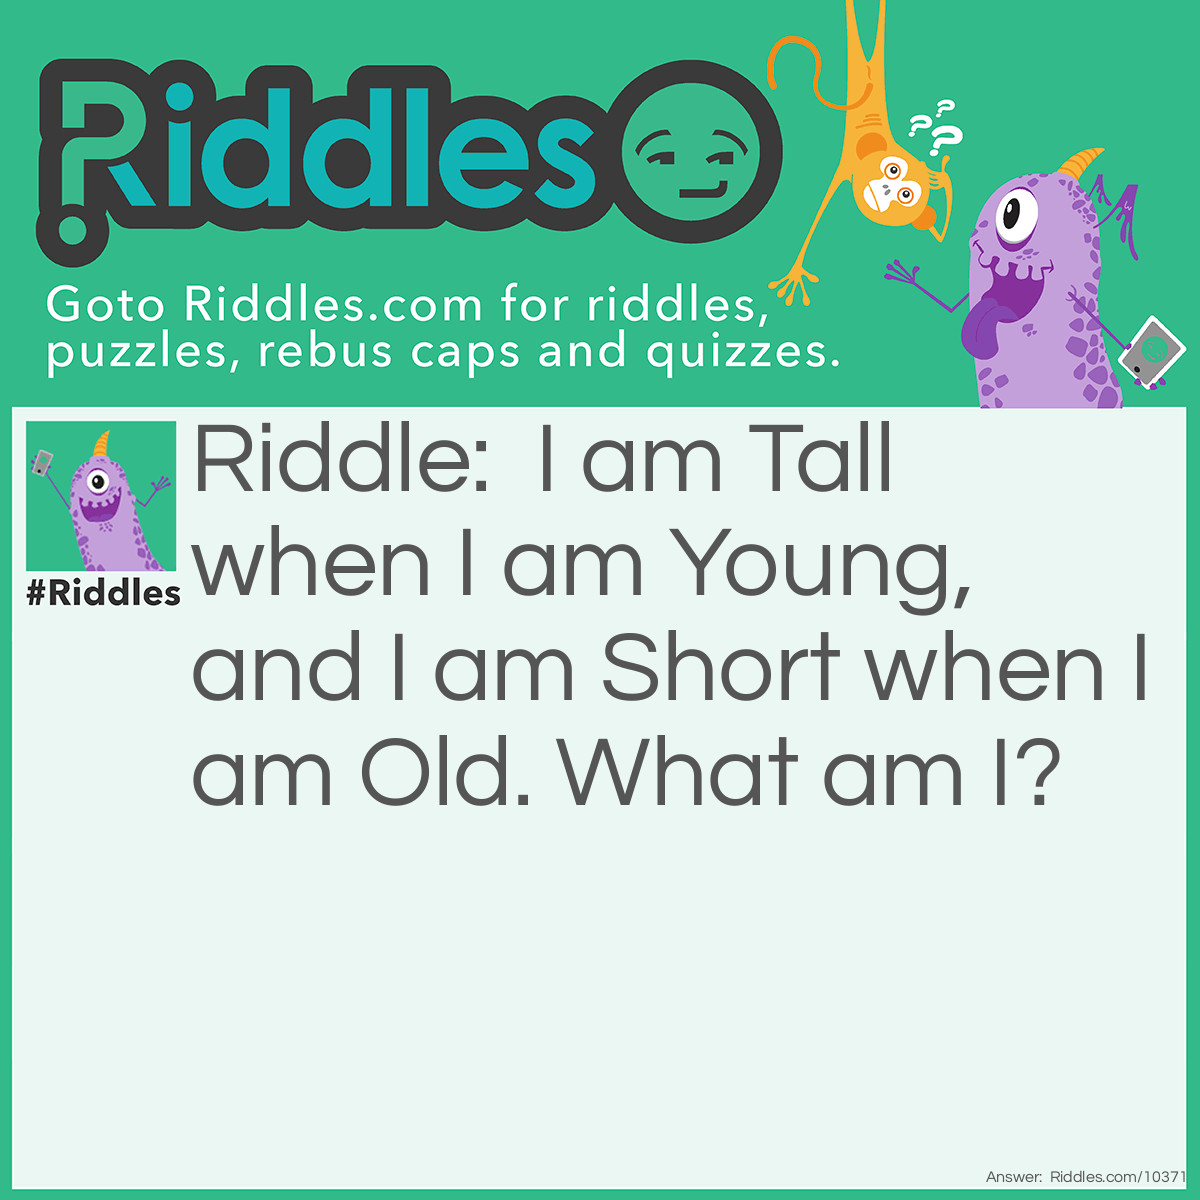 Riddle: I am Tall when I am Young, and I am Short when I am Old. What am I? Answer: A Candle! It is made up of Wax and it Melts as it is being used!